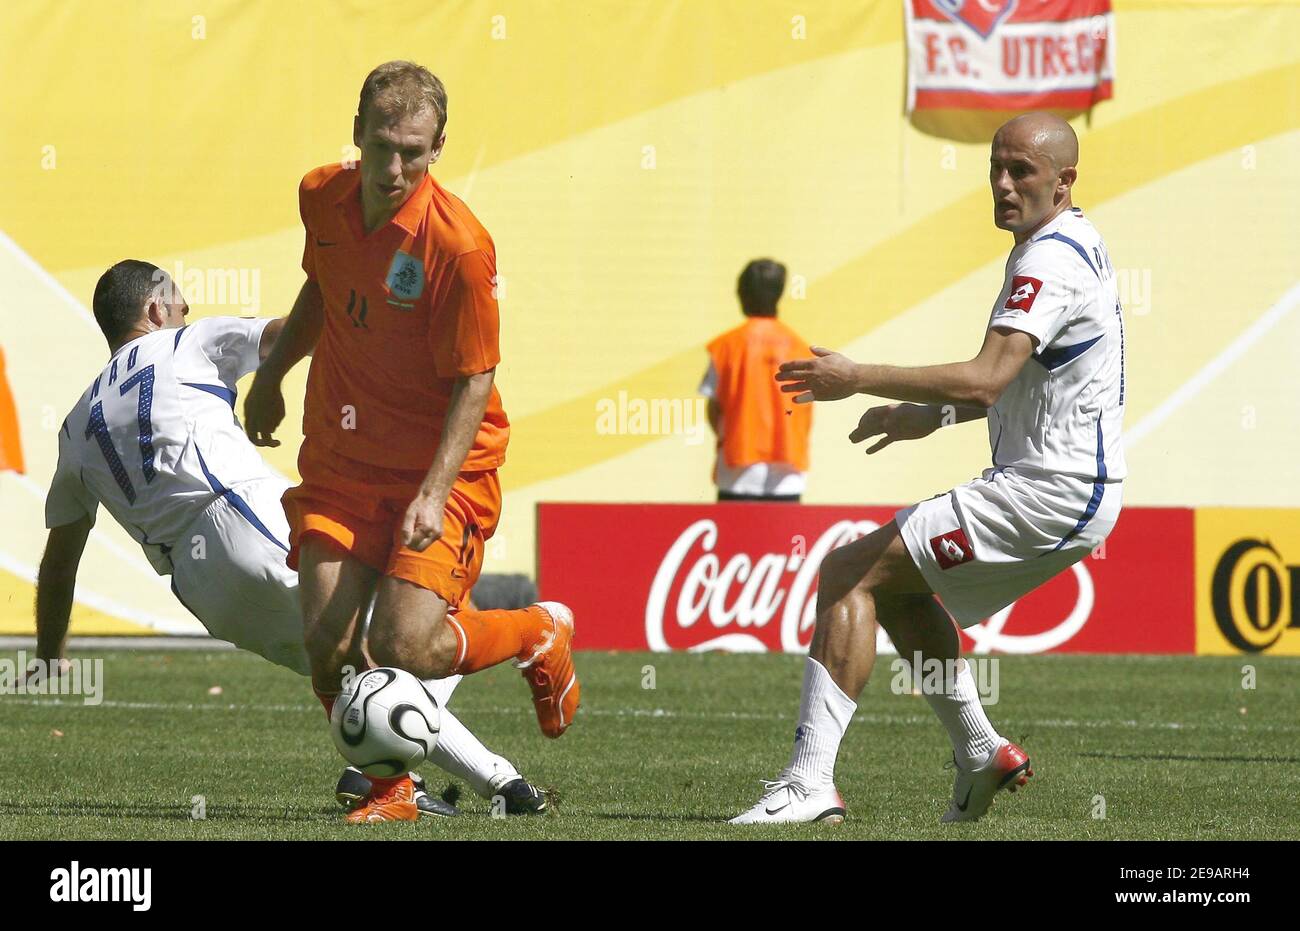 Serbia's Albert Nadj, Netherlands' Robin Van Persie and Serbia's Predrag Djordjevic during the World Cup 2006, Group C, Serbia and Montenegro vs Netherlands in Leipzig, Germany on June 11, 2006. Netherlands won 1-0. Photo by Christian Liewig/ABACAPRESS.COM Stock Photo